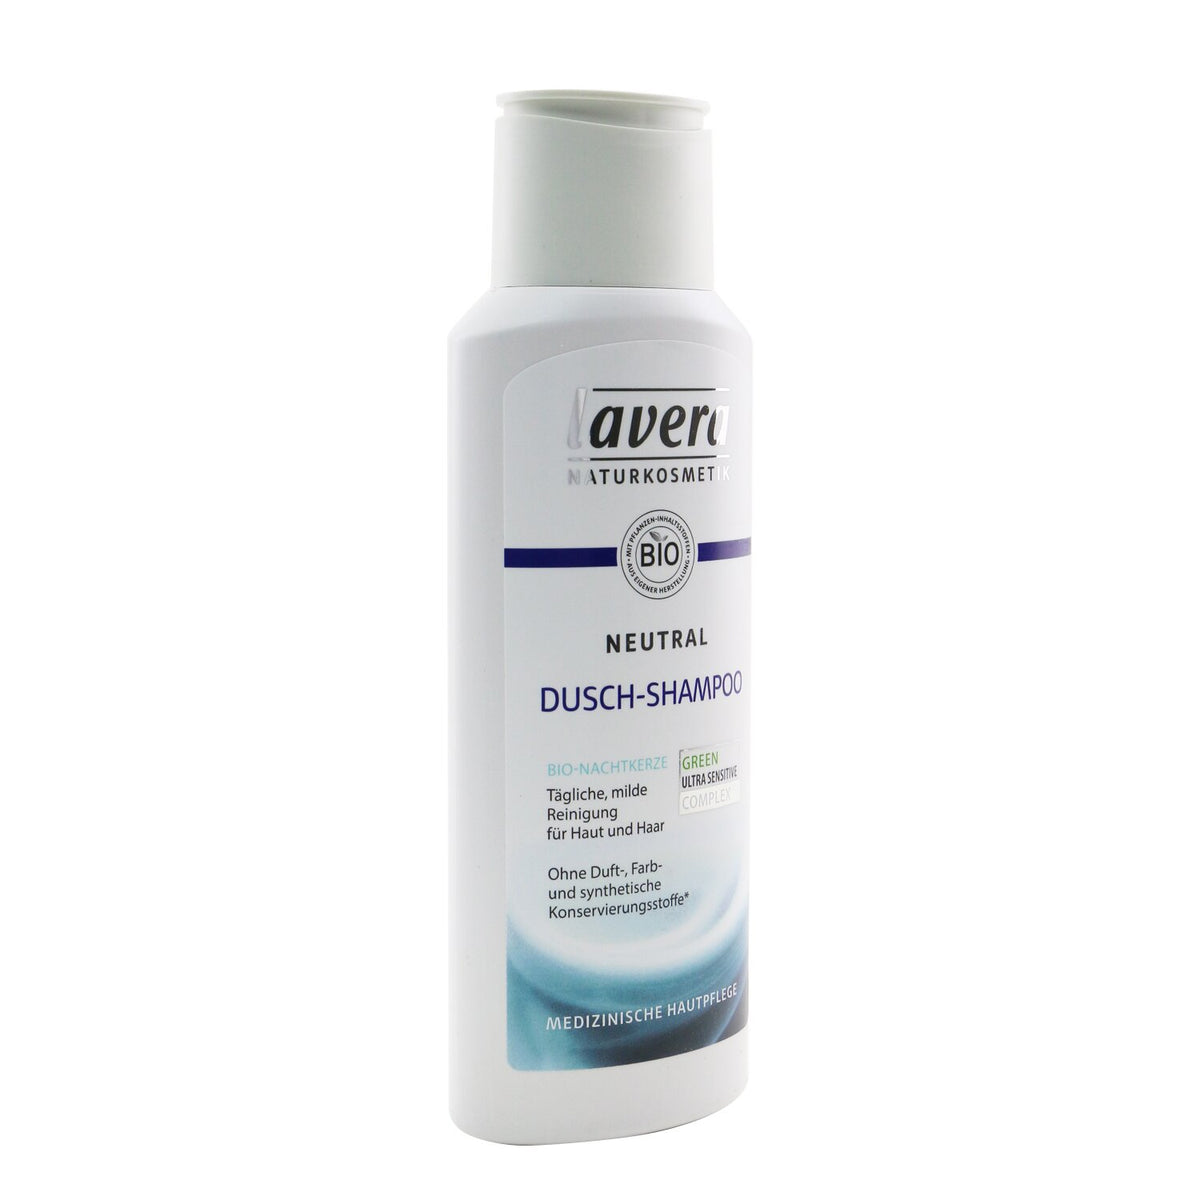 Neutral Shower (For Skin and Hair) for | Lavera, Hair Care, Buy Now – Author